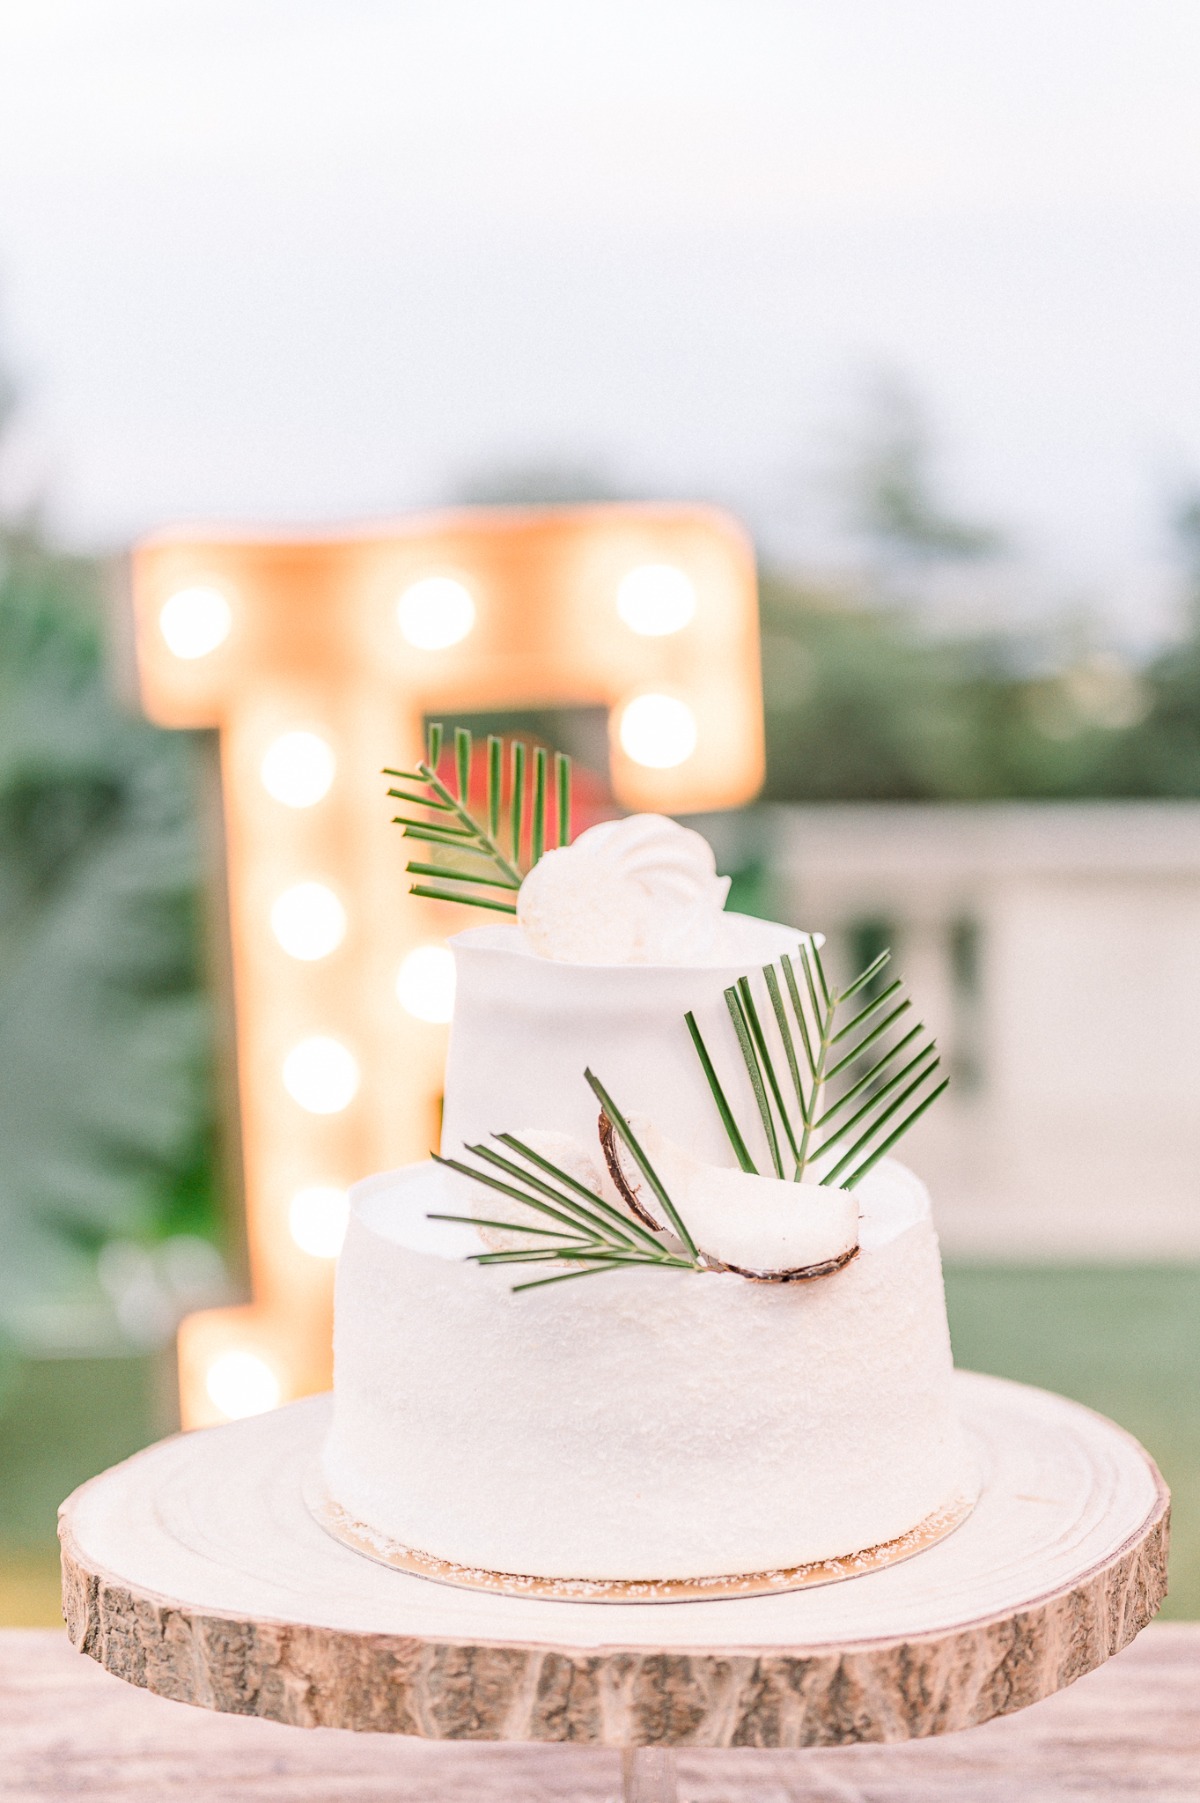 White wedding cake accented with leaves and coconut pieces